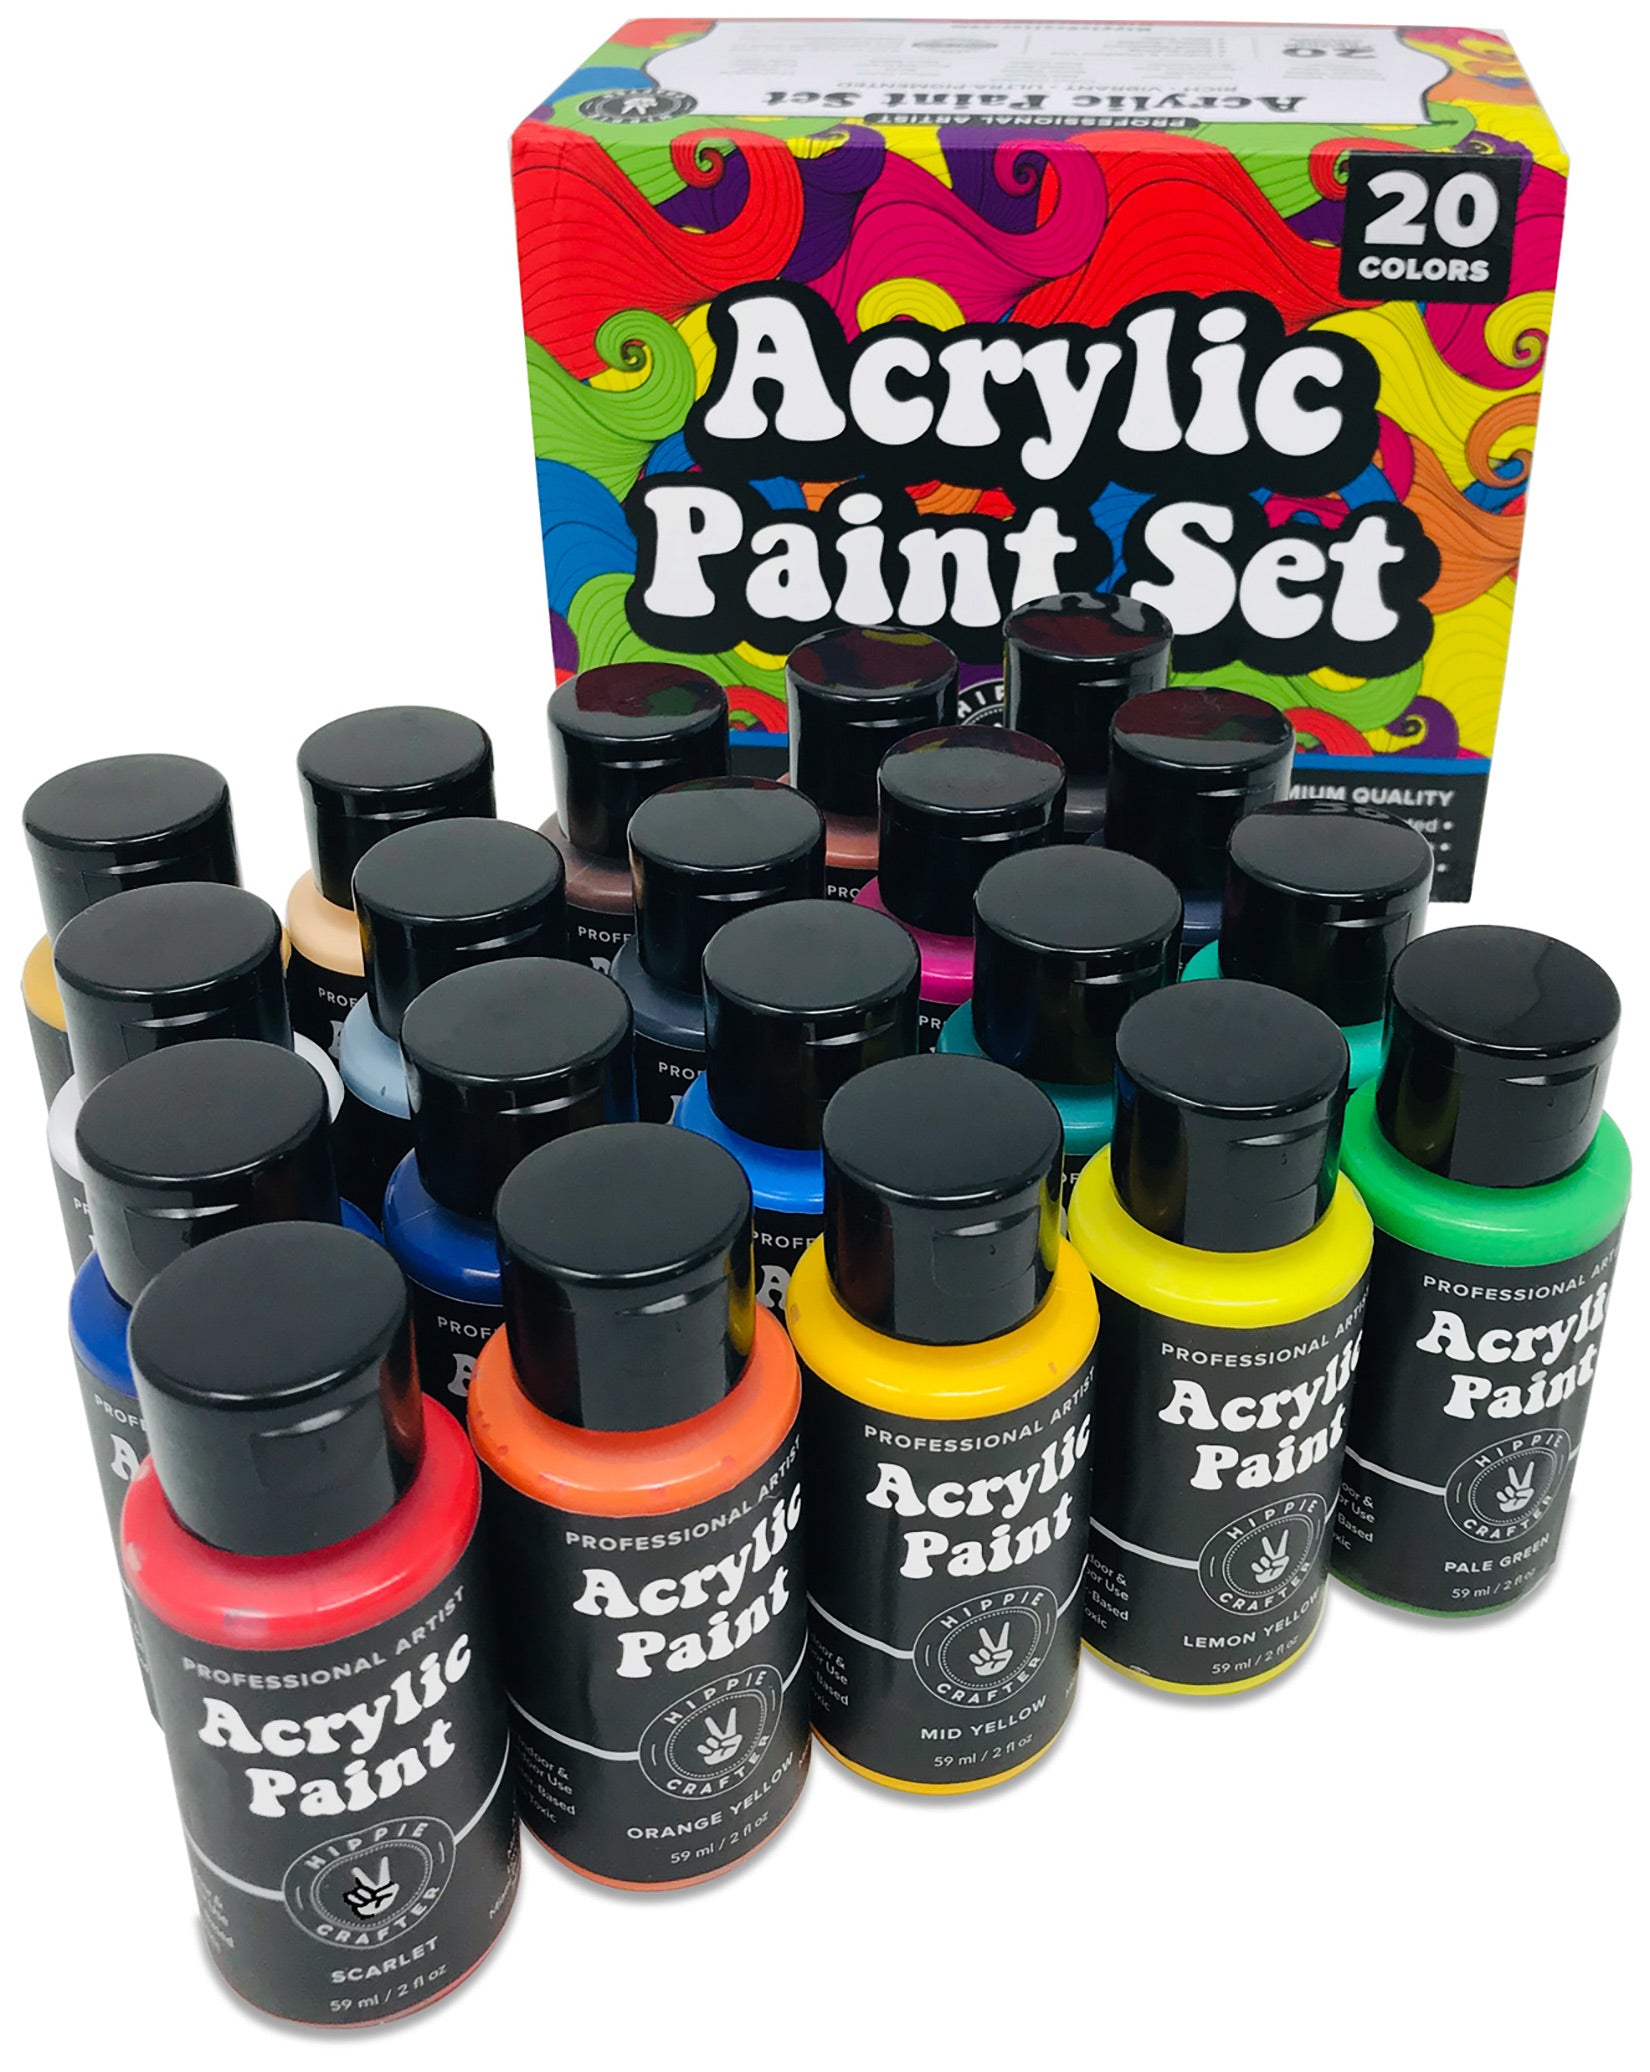 Acrylic Paint Set 20 Colors Acrylic Paints for Canvas Painting Pack -  Acrylic Craft Paint Sets for